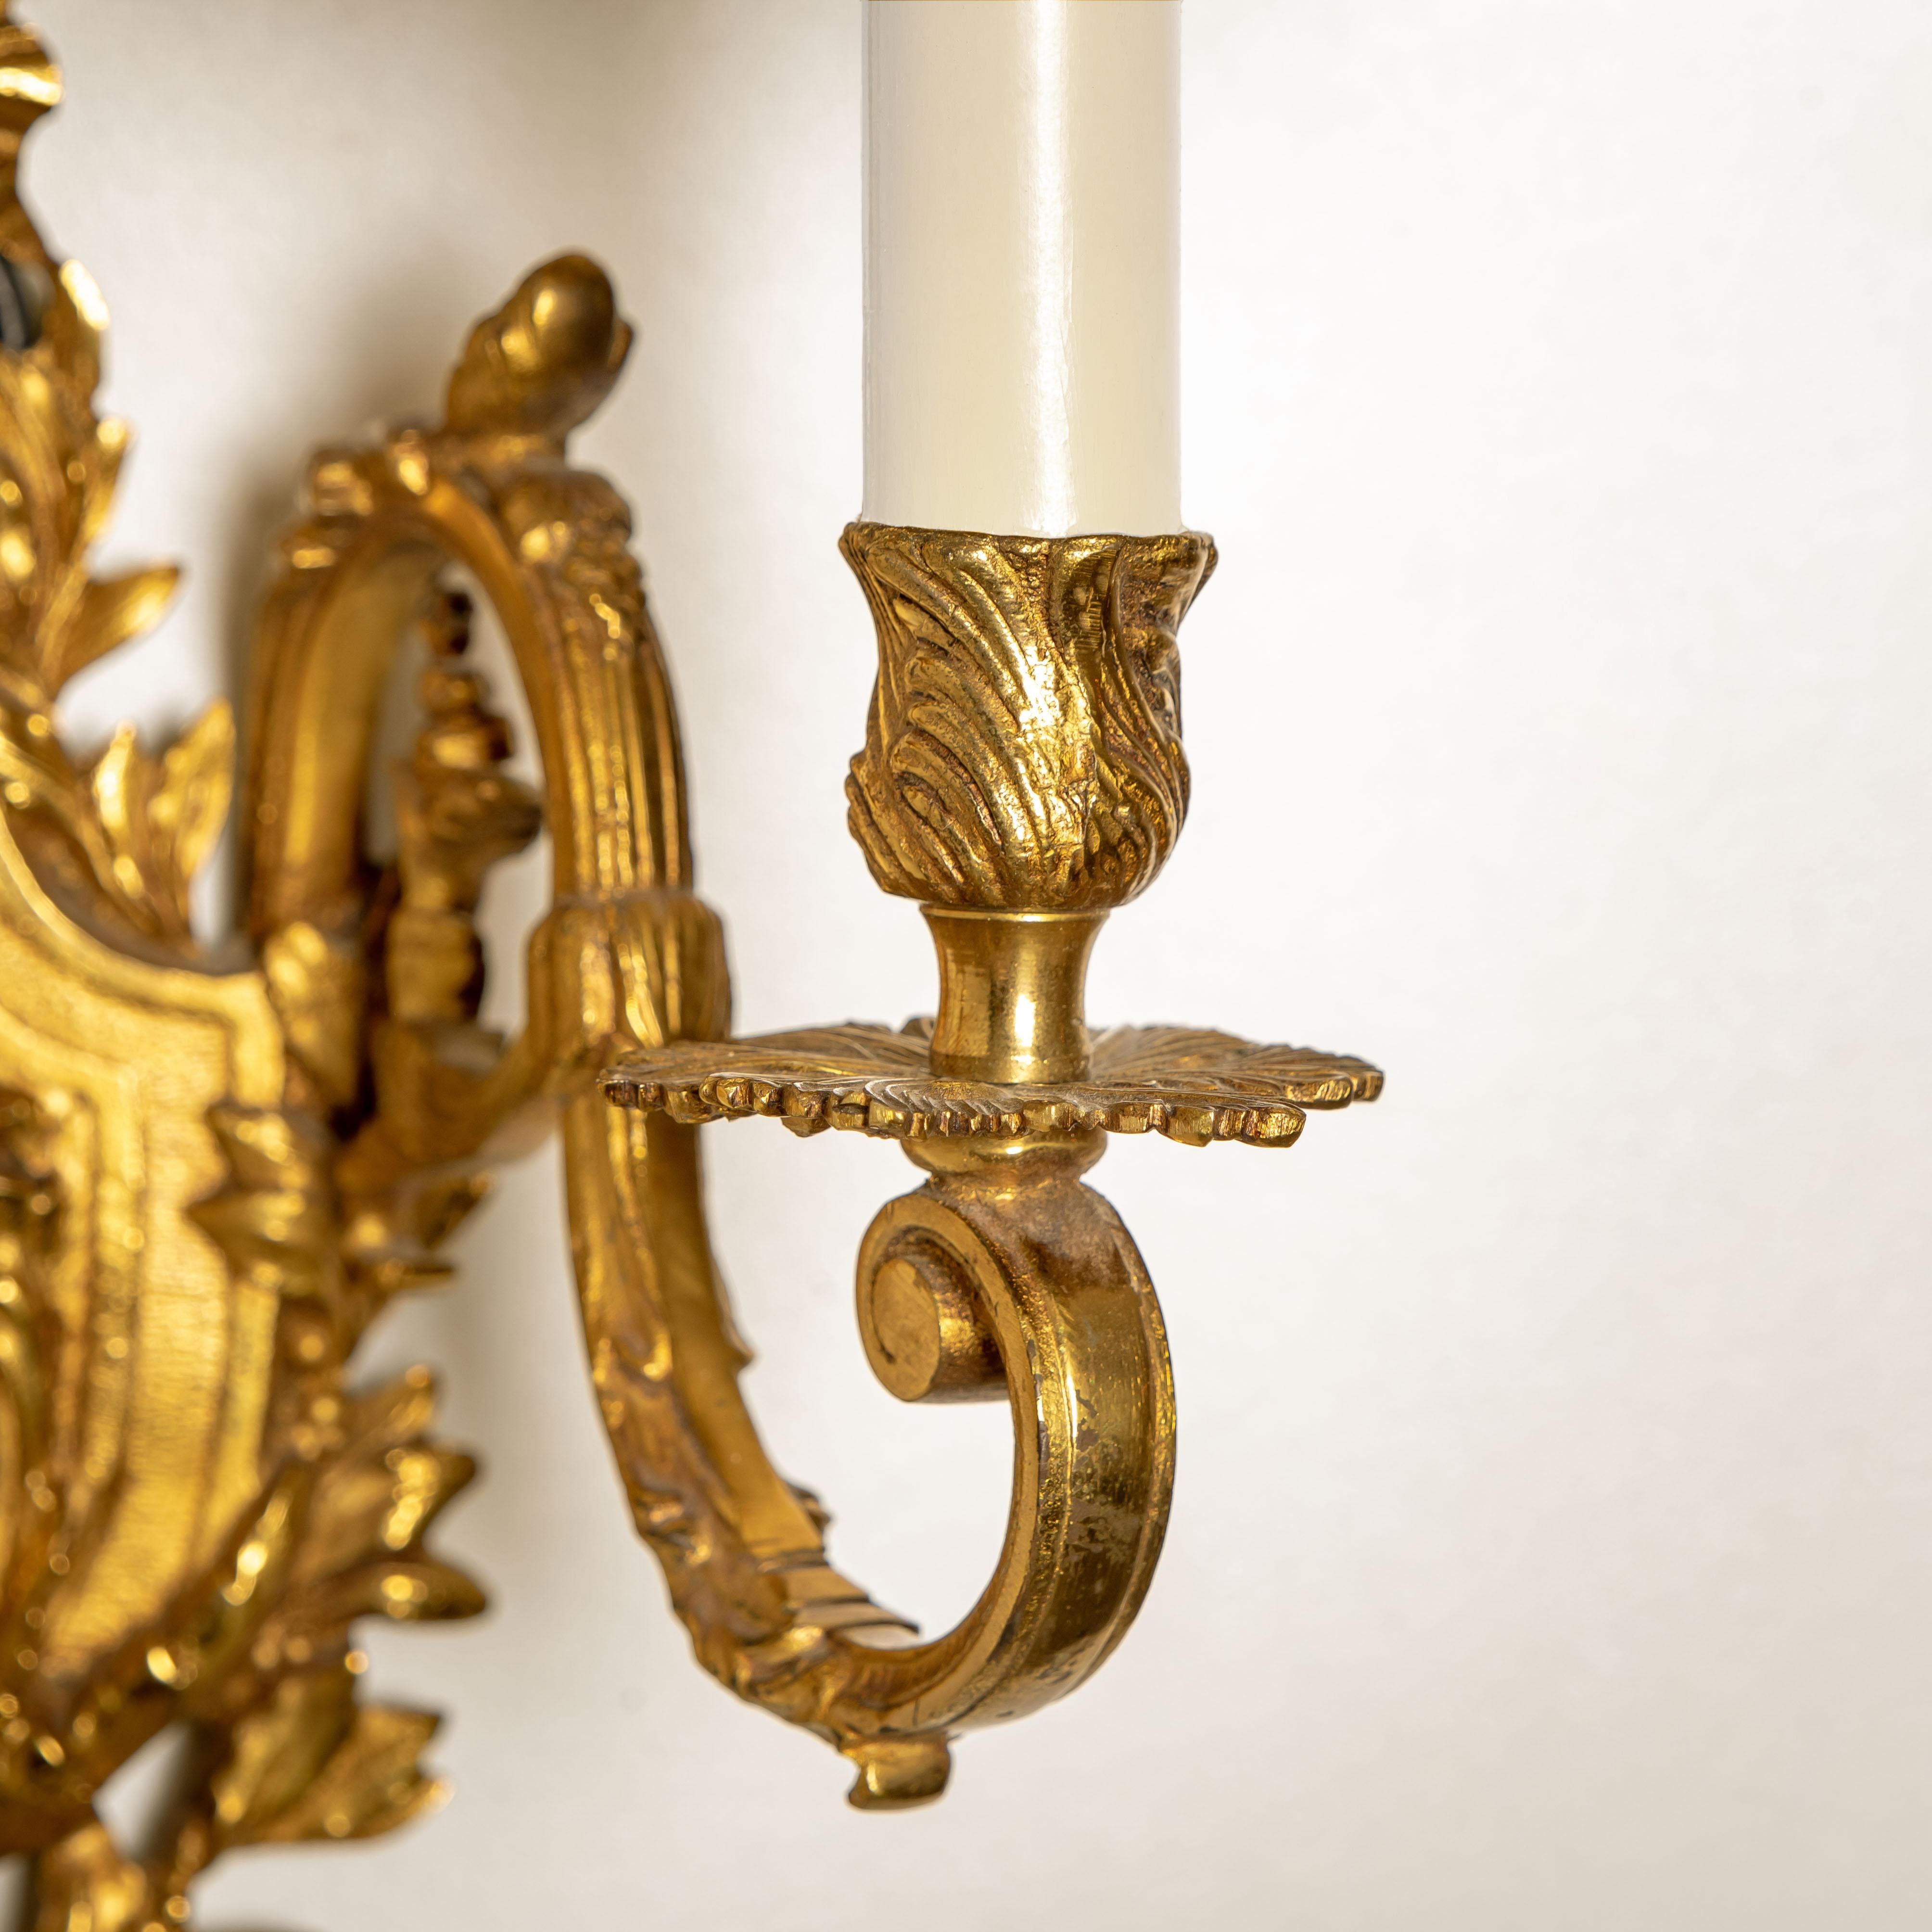 1 of the 2 Antique French Massive Bronze Louis XVI Wall Sconces 2